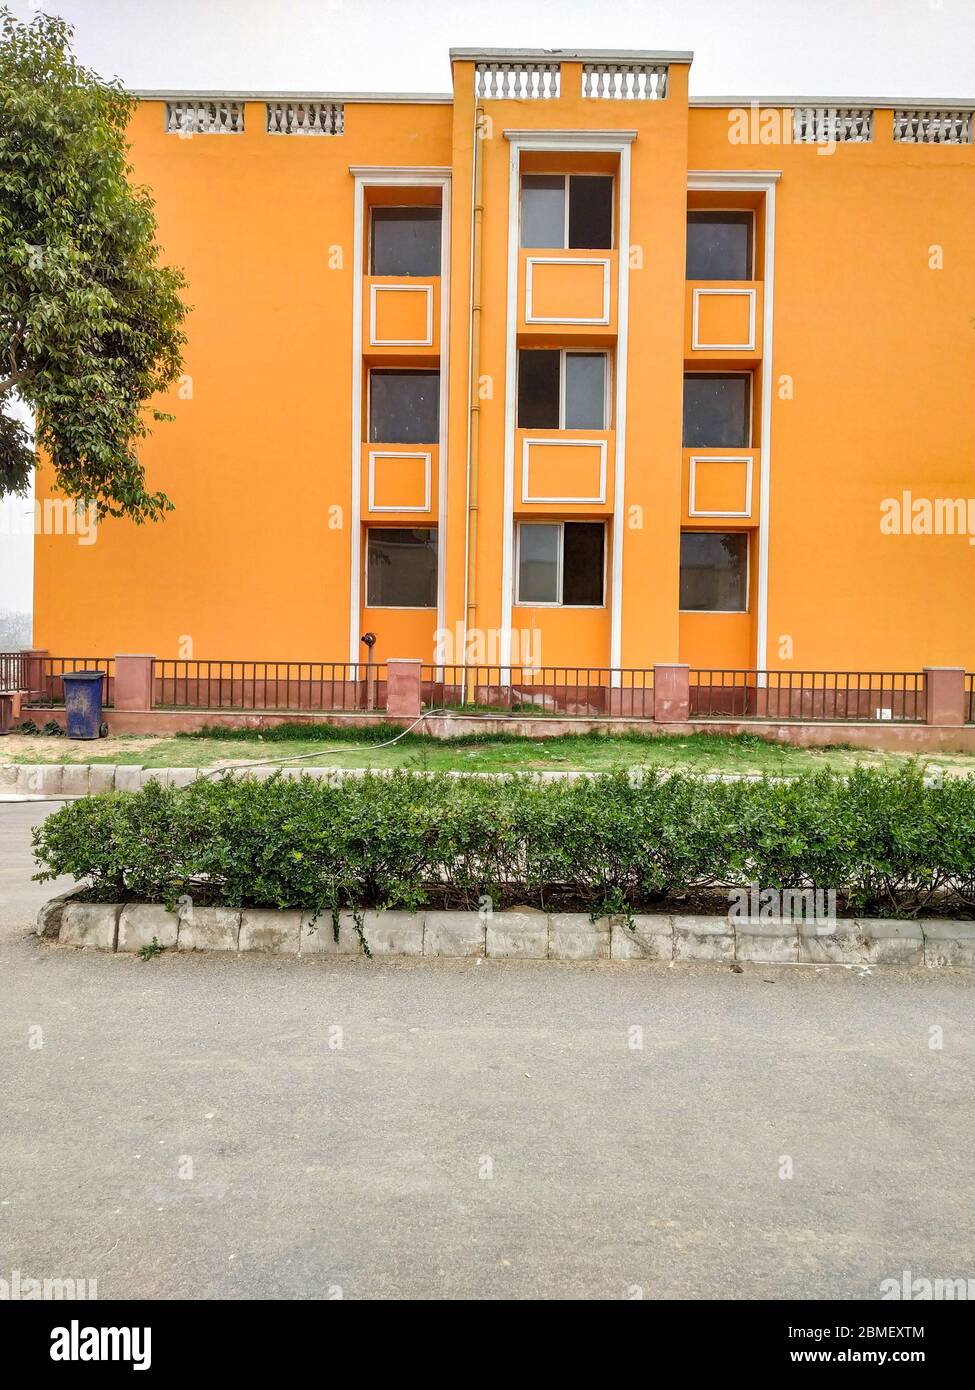 Orange colored house in the city with multiple parallel windows Stock Photo